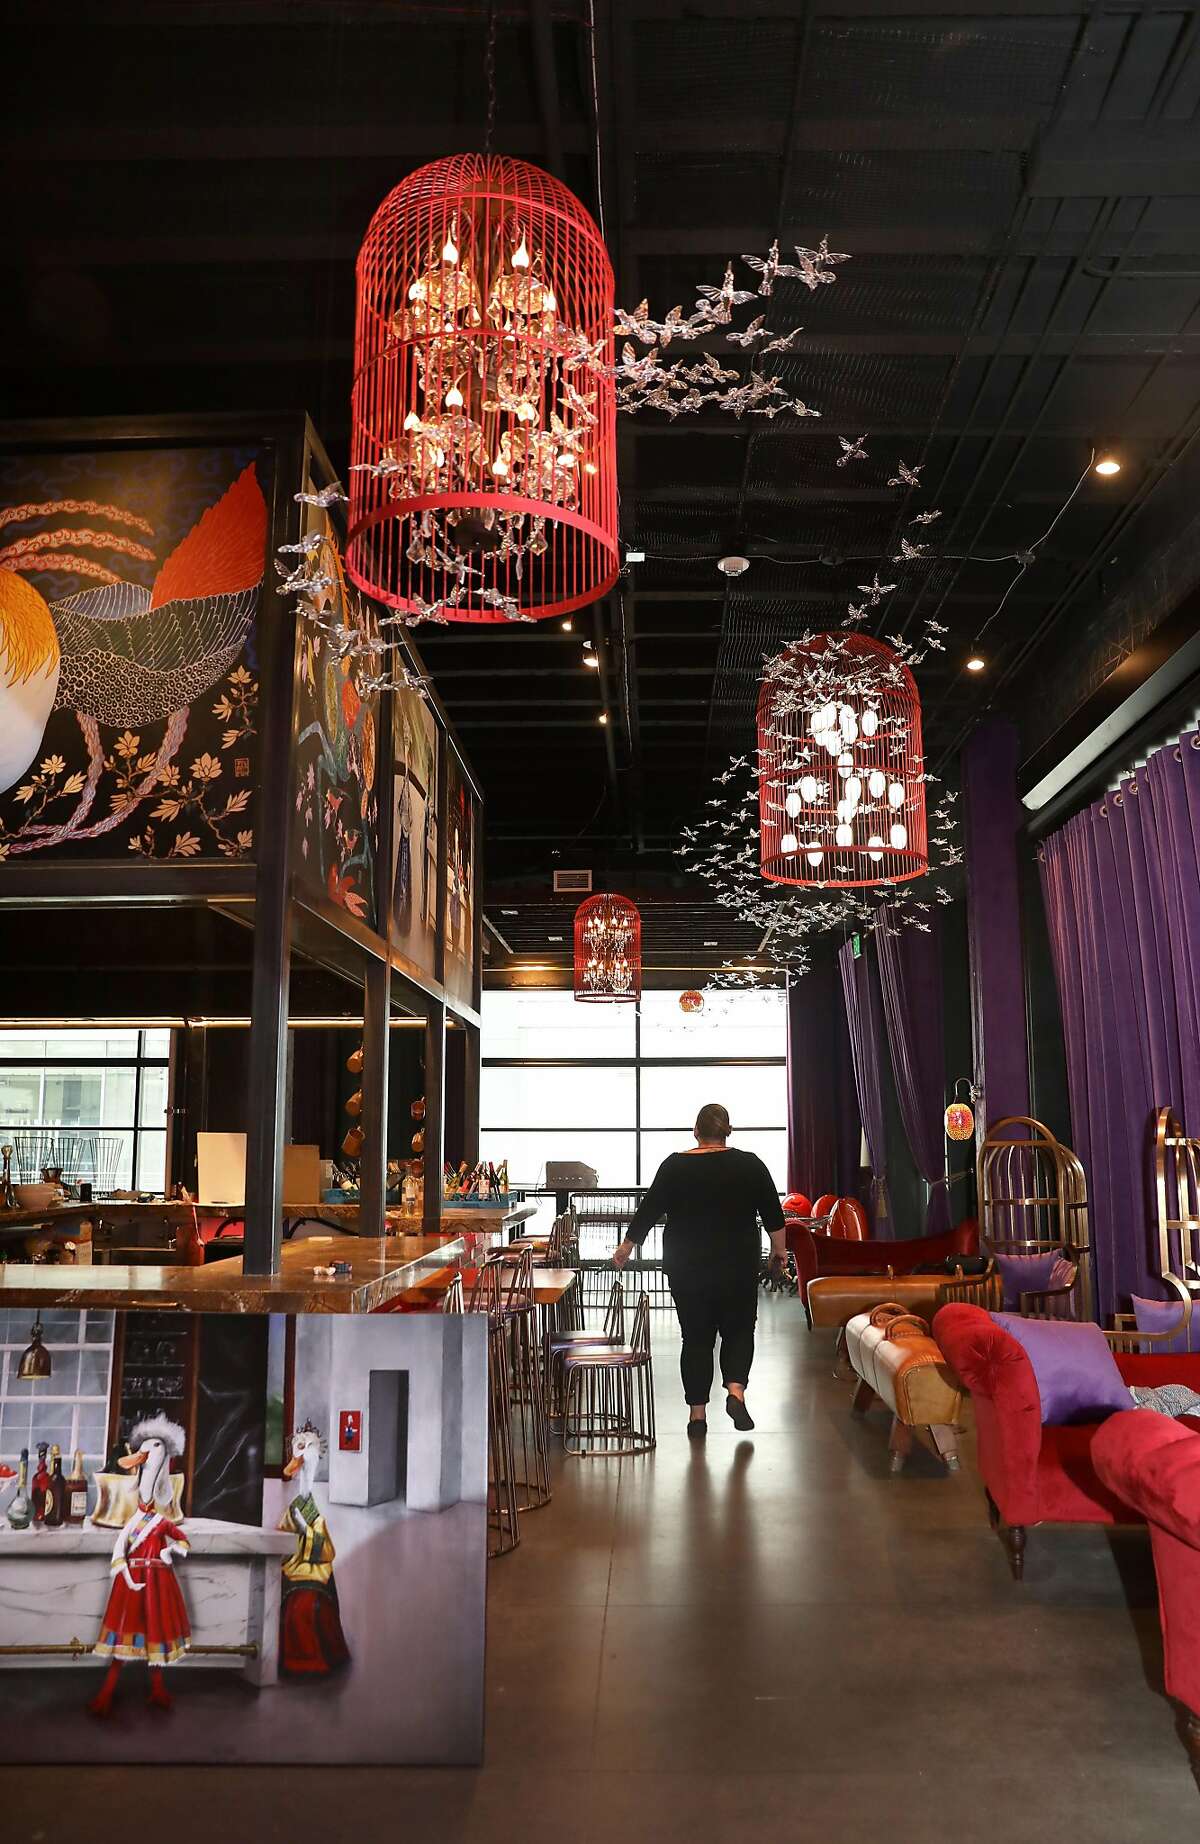 Dim sum bar, Northern Duck, is the restaurant which is part of the expansion across the hall from The Market on Tuesday, July 28, 2020, in San Francisco, Calif.